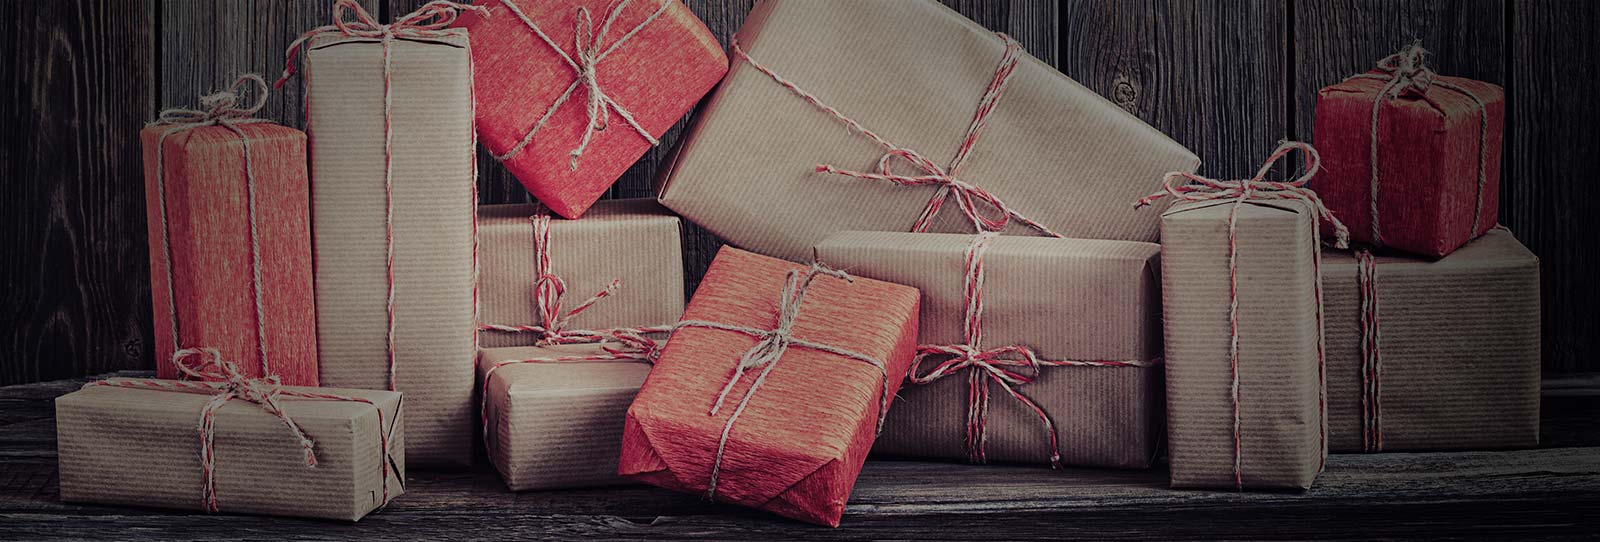 Top Five Ways to Make Holiday Gift-Giving a Breeze